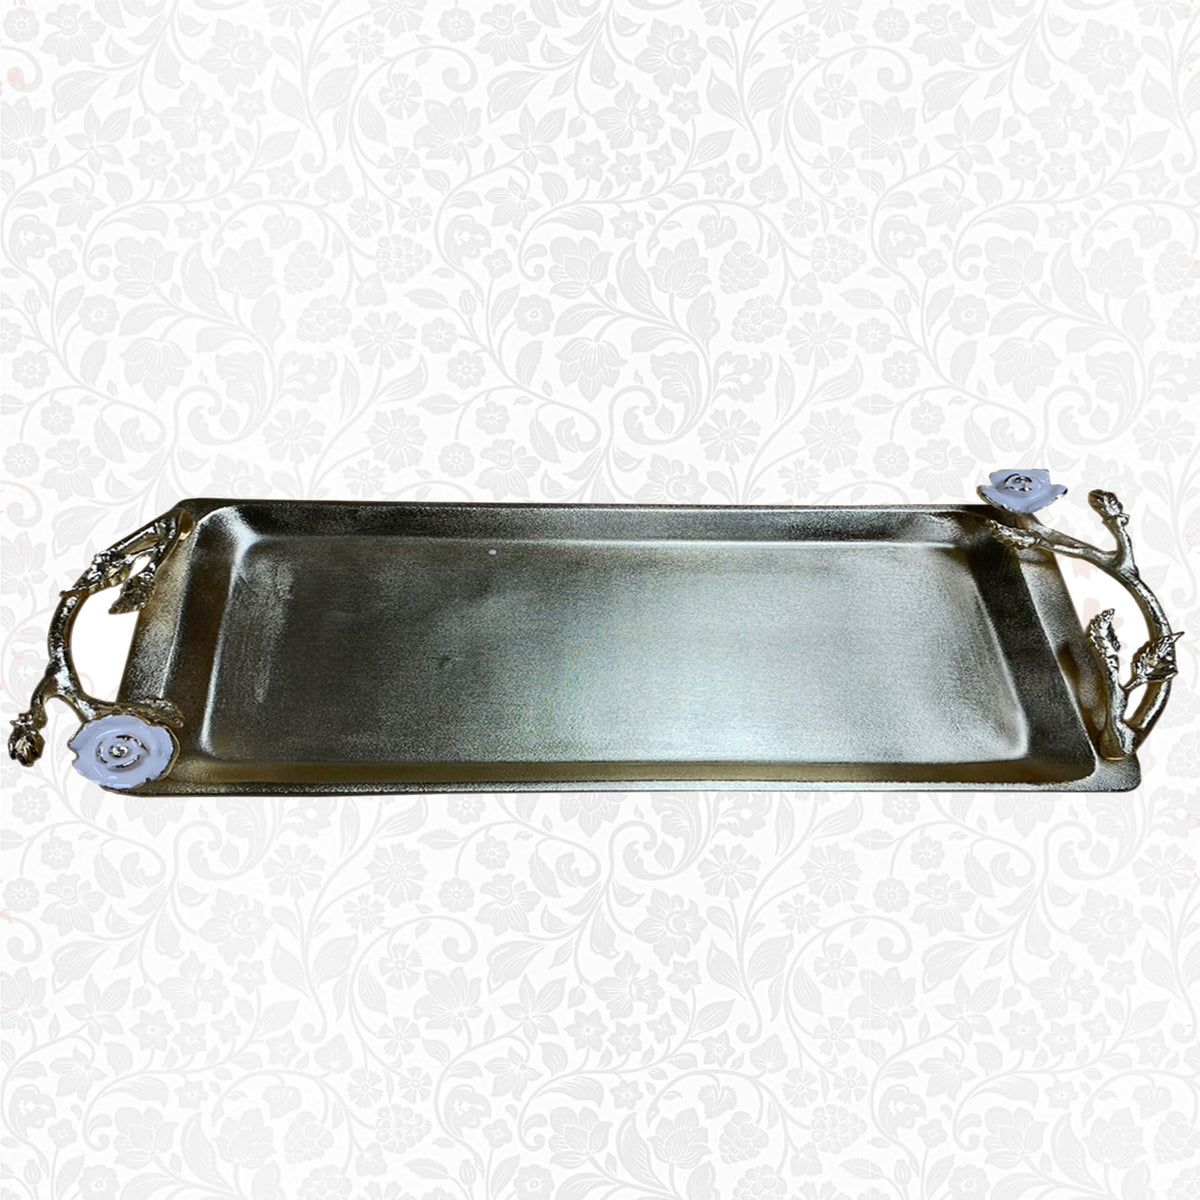 The Enamelled Rose Collection - Vanity Tray - Decozen